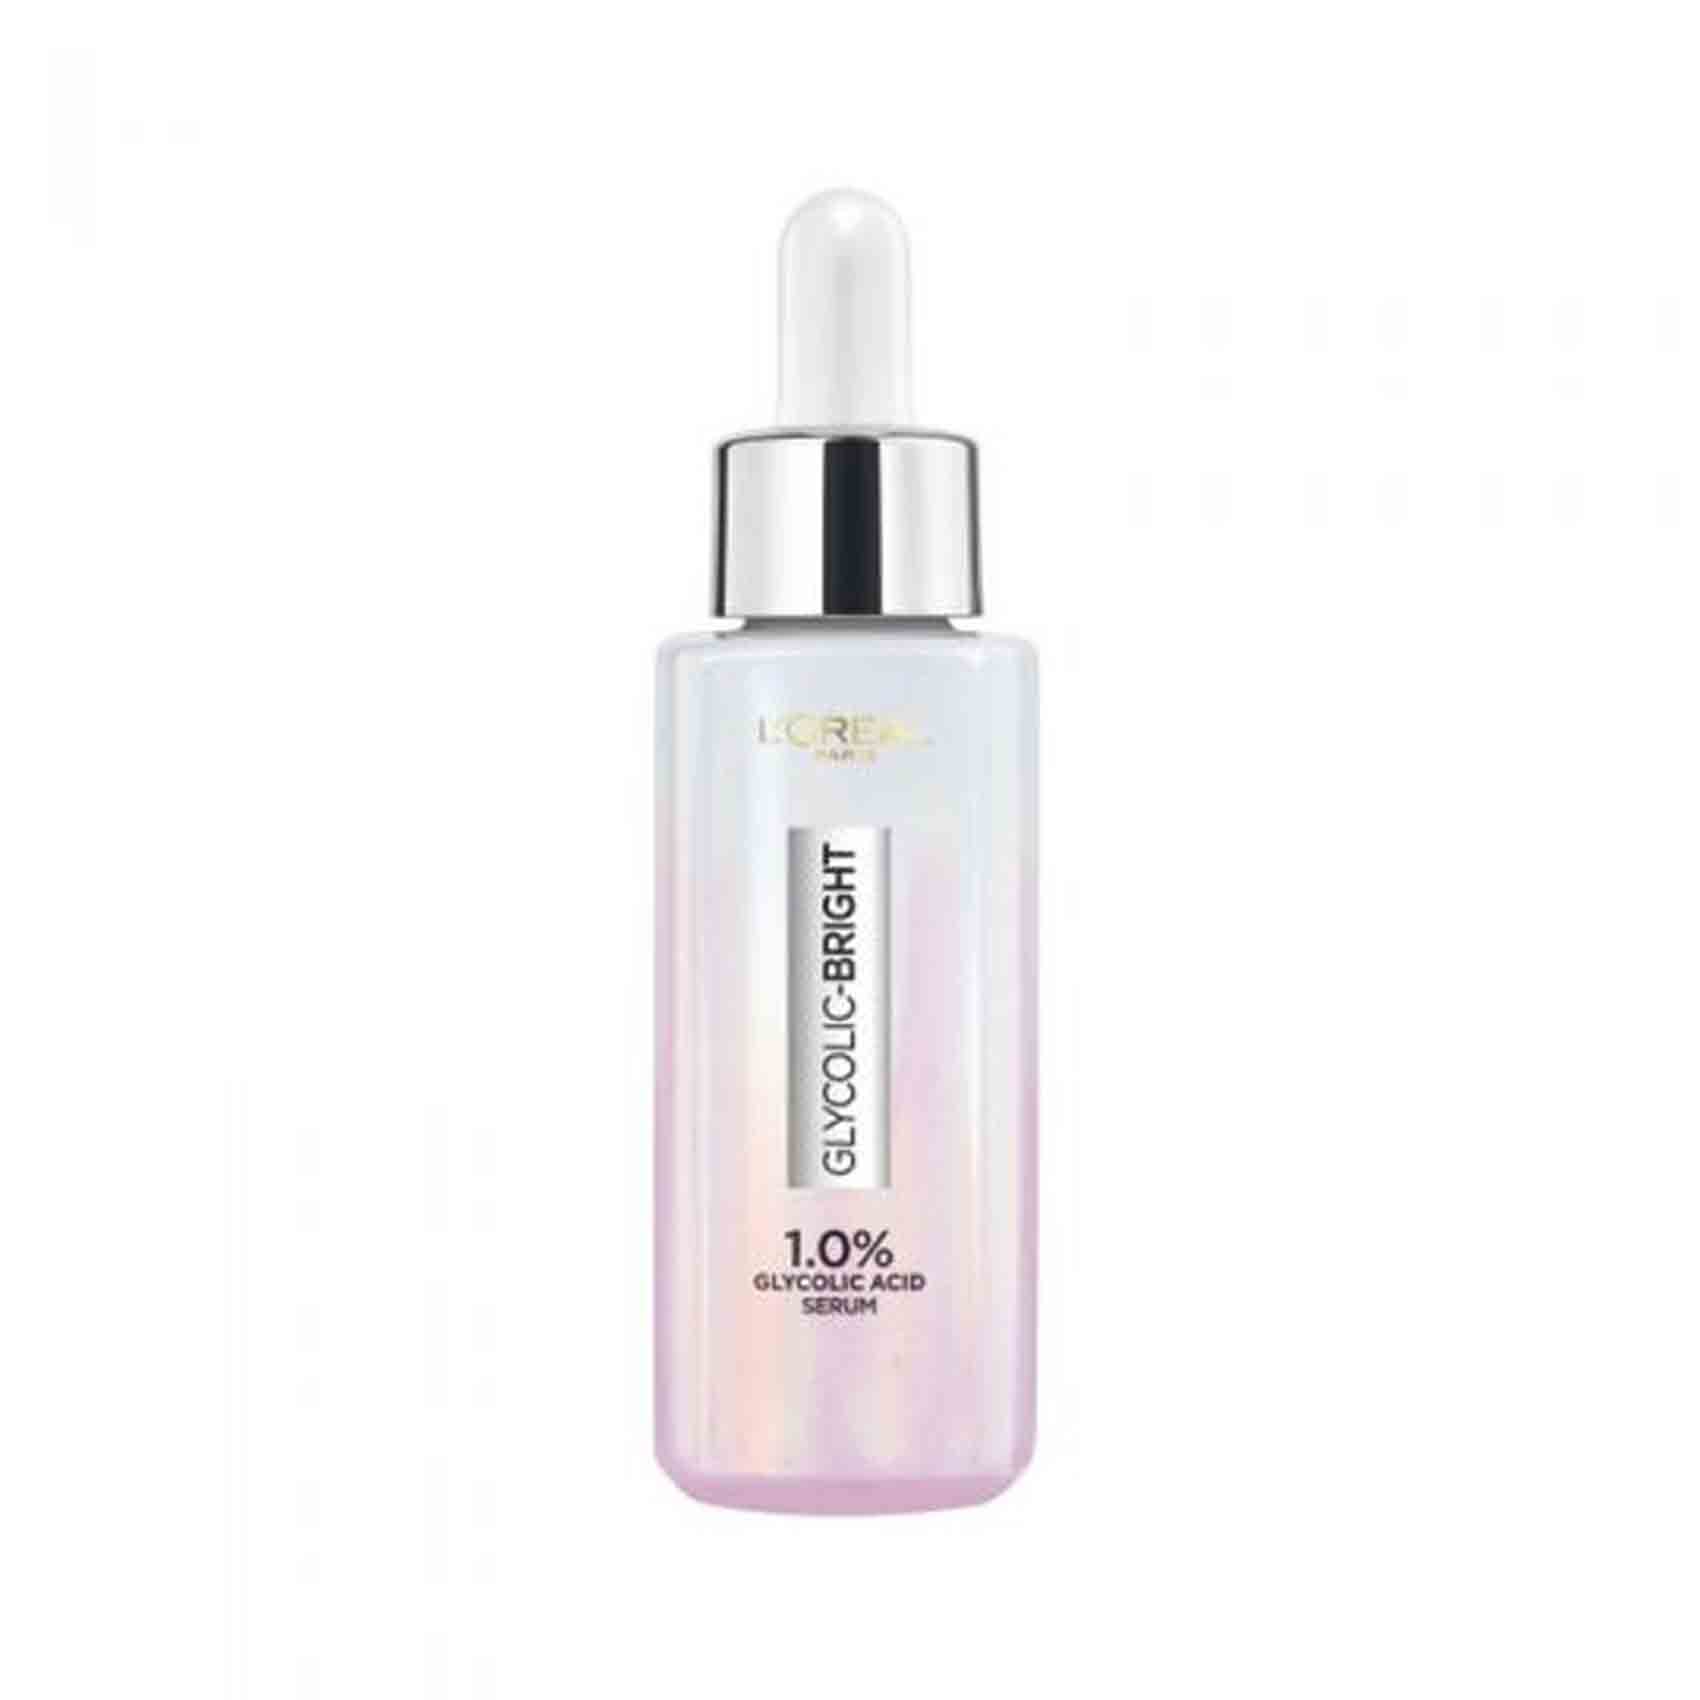 L&#39;Oreal Paris Glycolic Bright Instant Glowing Face Serum